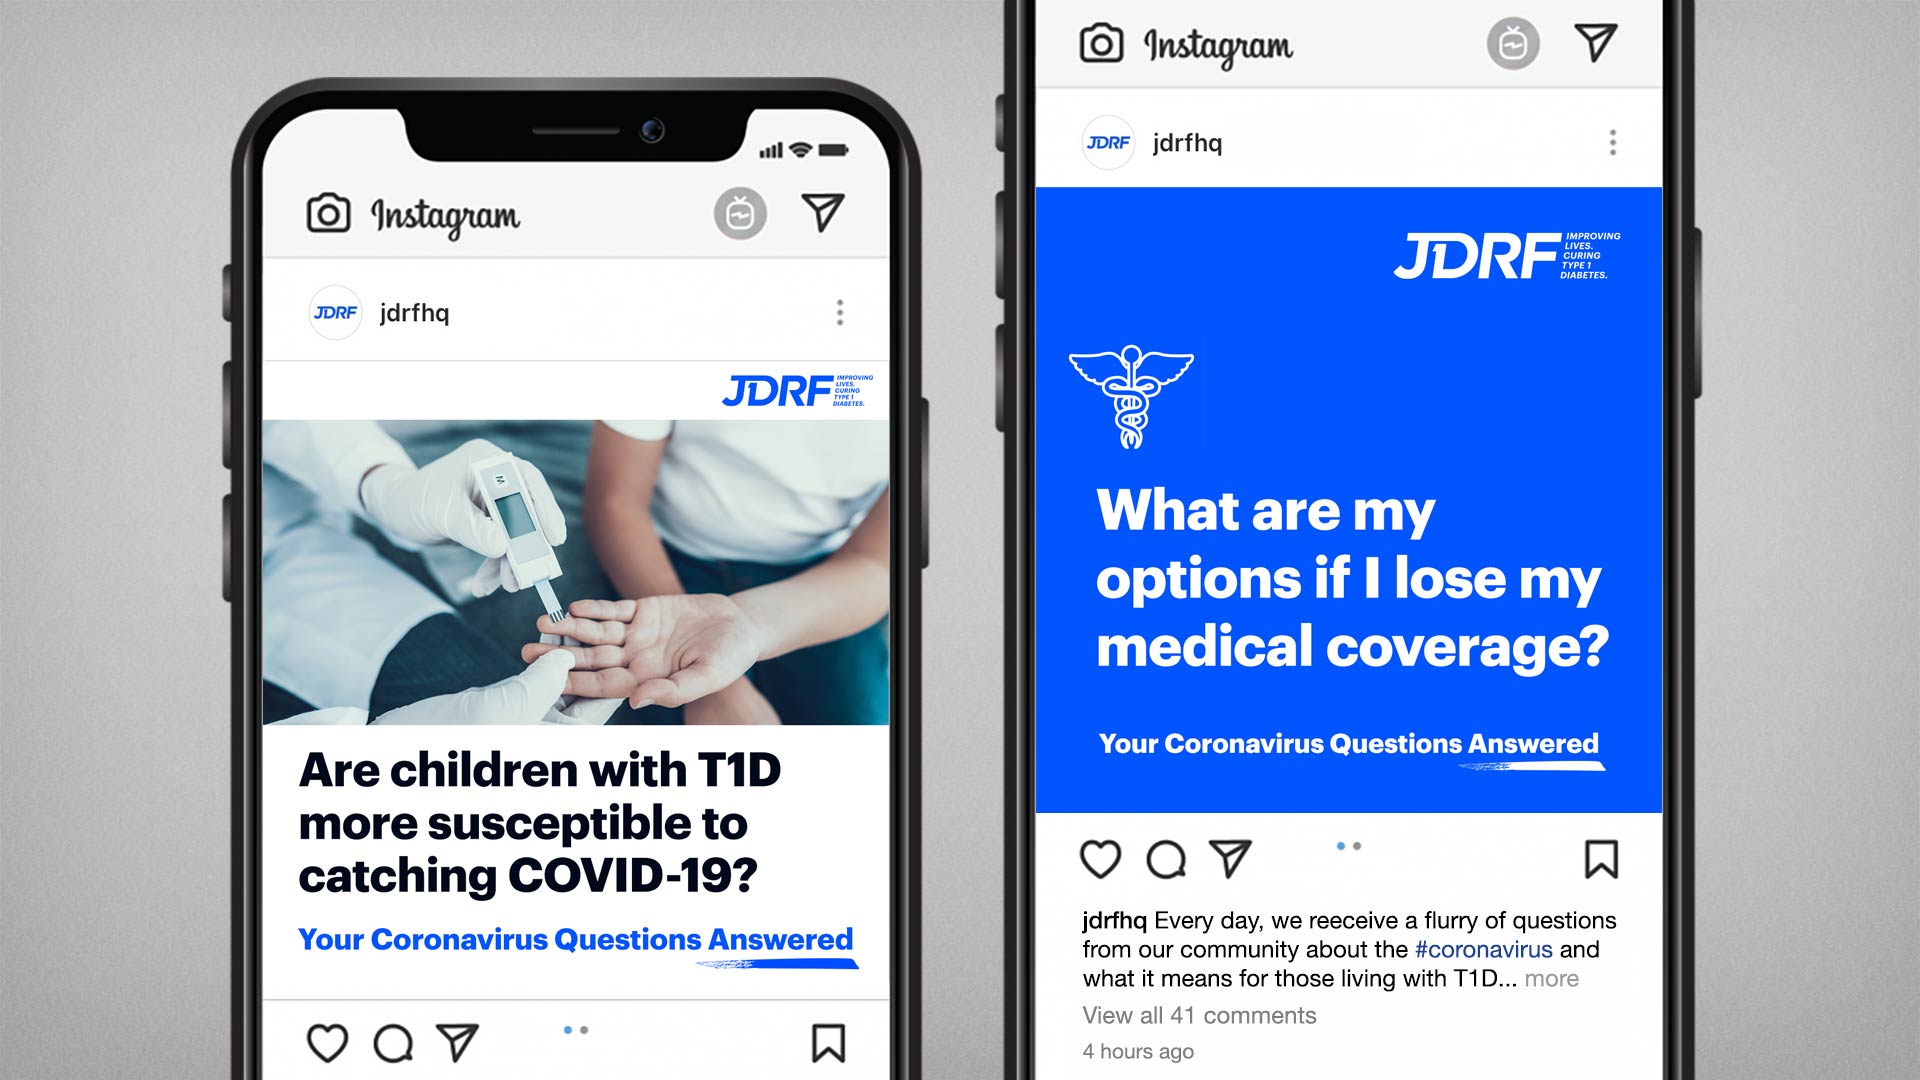 JDRF 'Coronavirus Questions Answered' Social Media Shareable Graphics